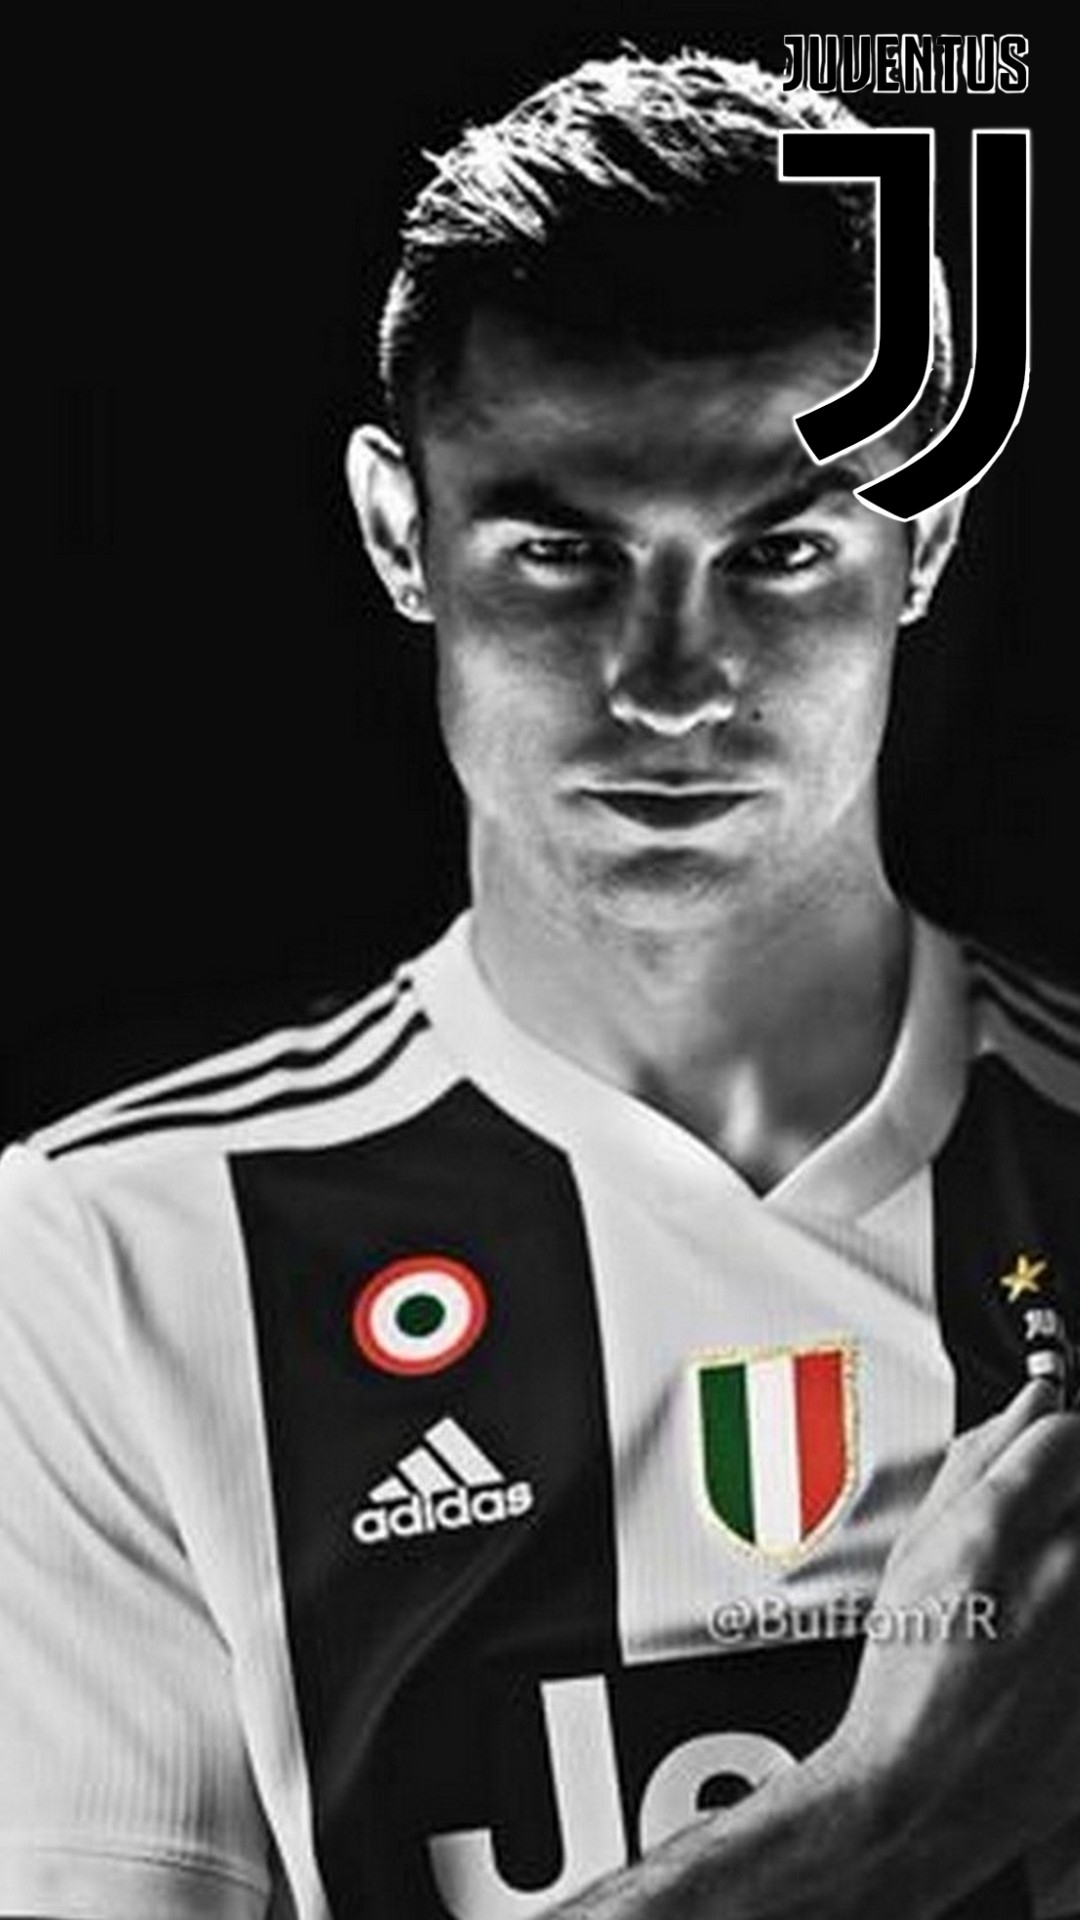 Cristiano Ronaldo Juventus iPhone X Wallpaper With Resolution 1080X1920 pixel. You can make this wallpaper for your Mac or Windows Desktop Background, iPhone, Android or Tablet and another Smartphone device for free